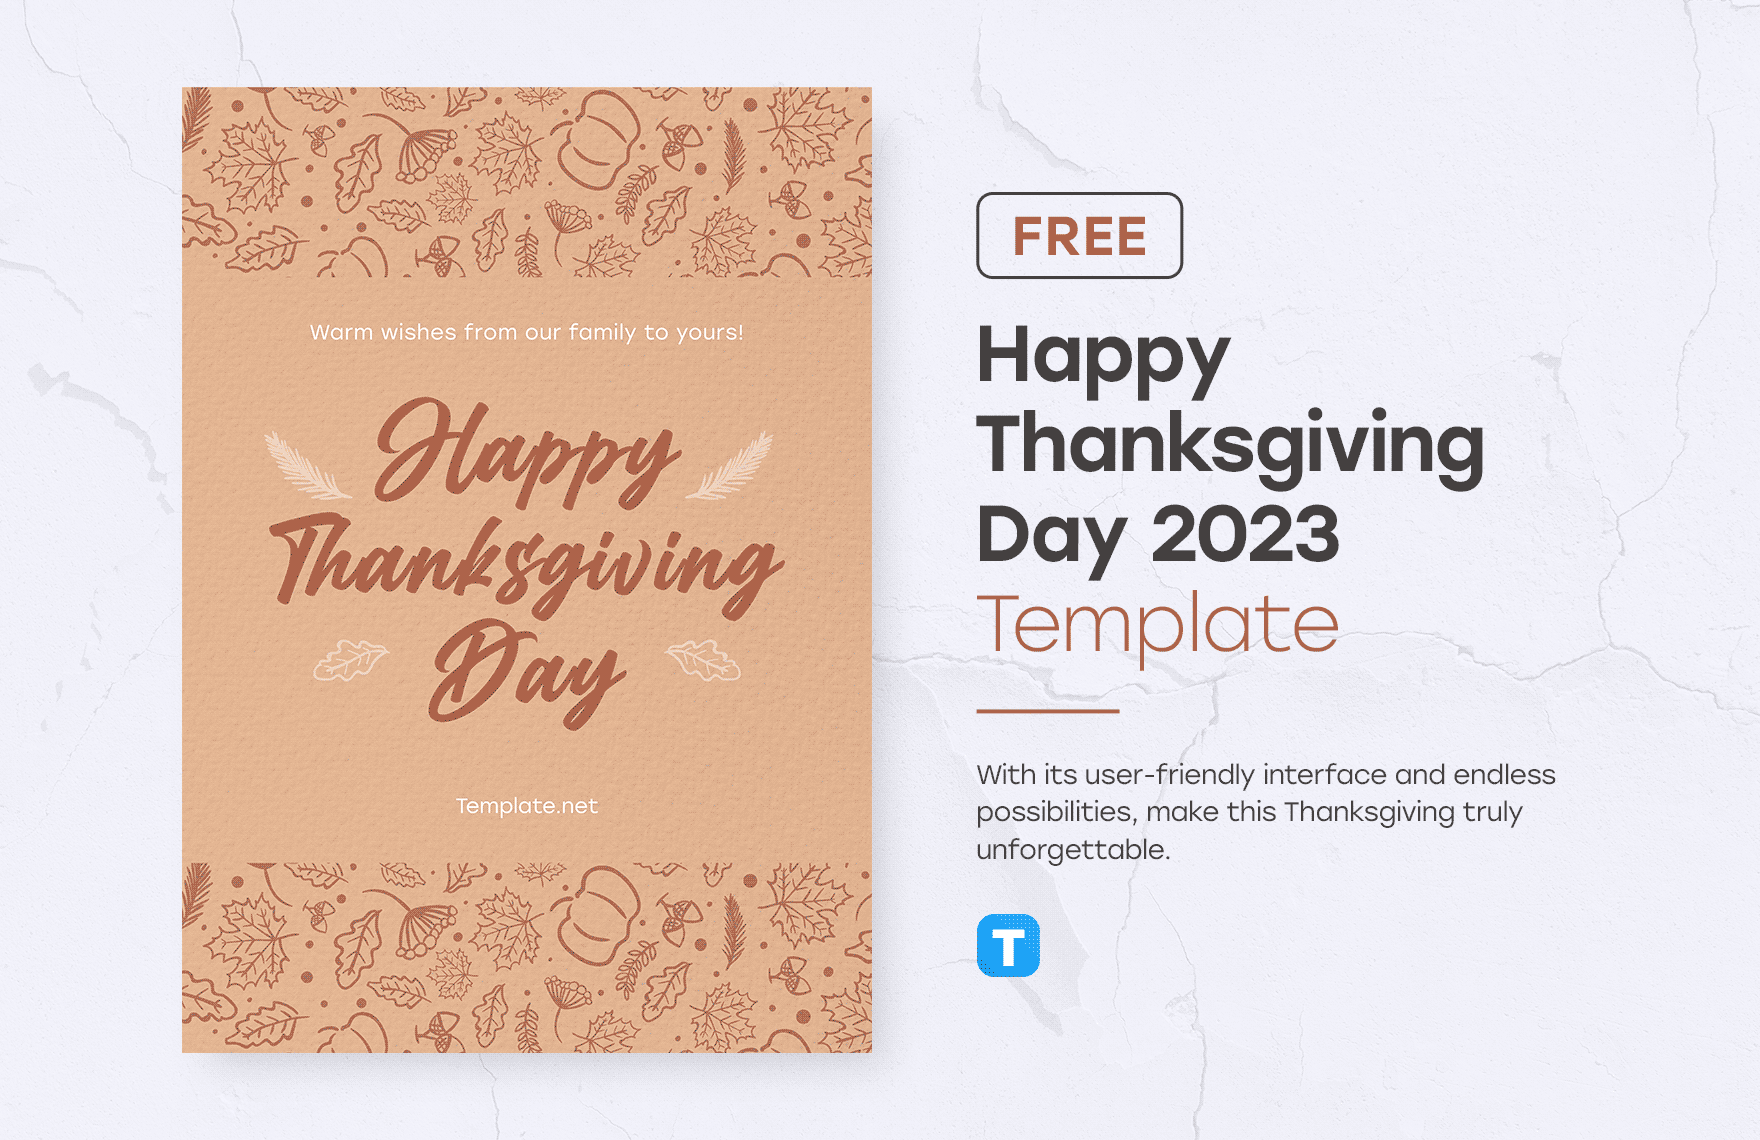 Happy Thanksgiving Day 2023 Template